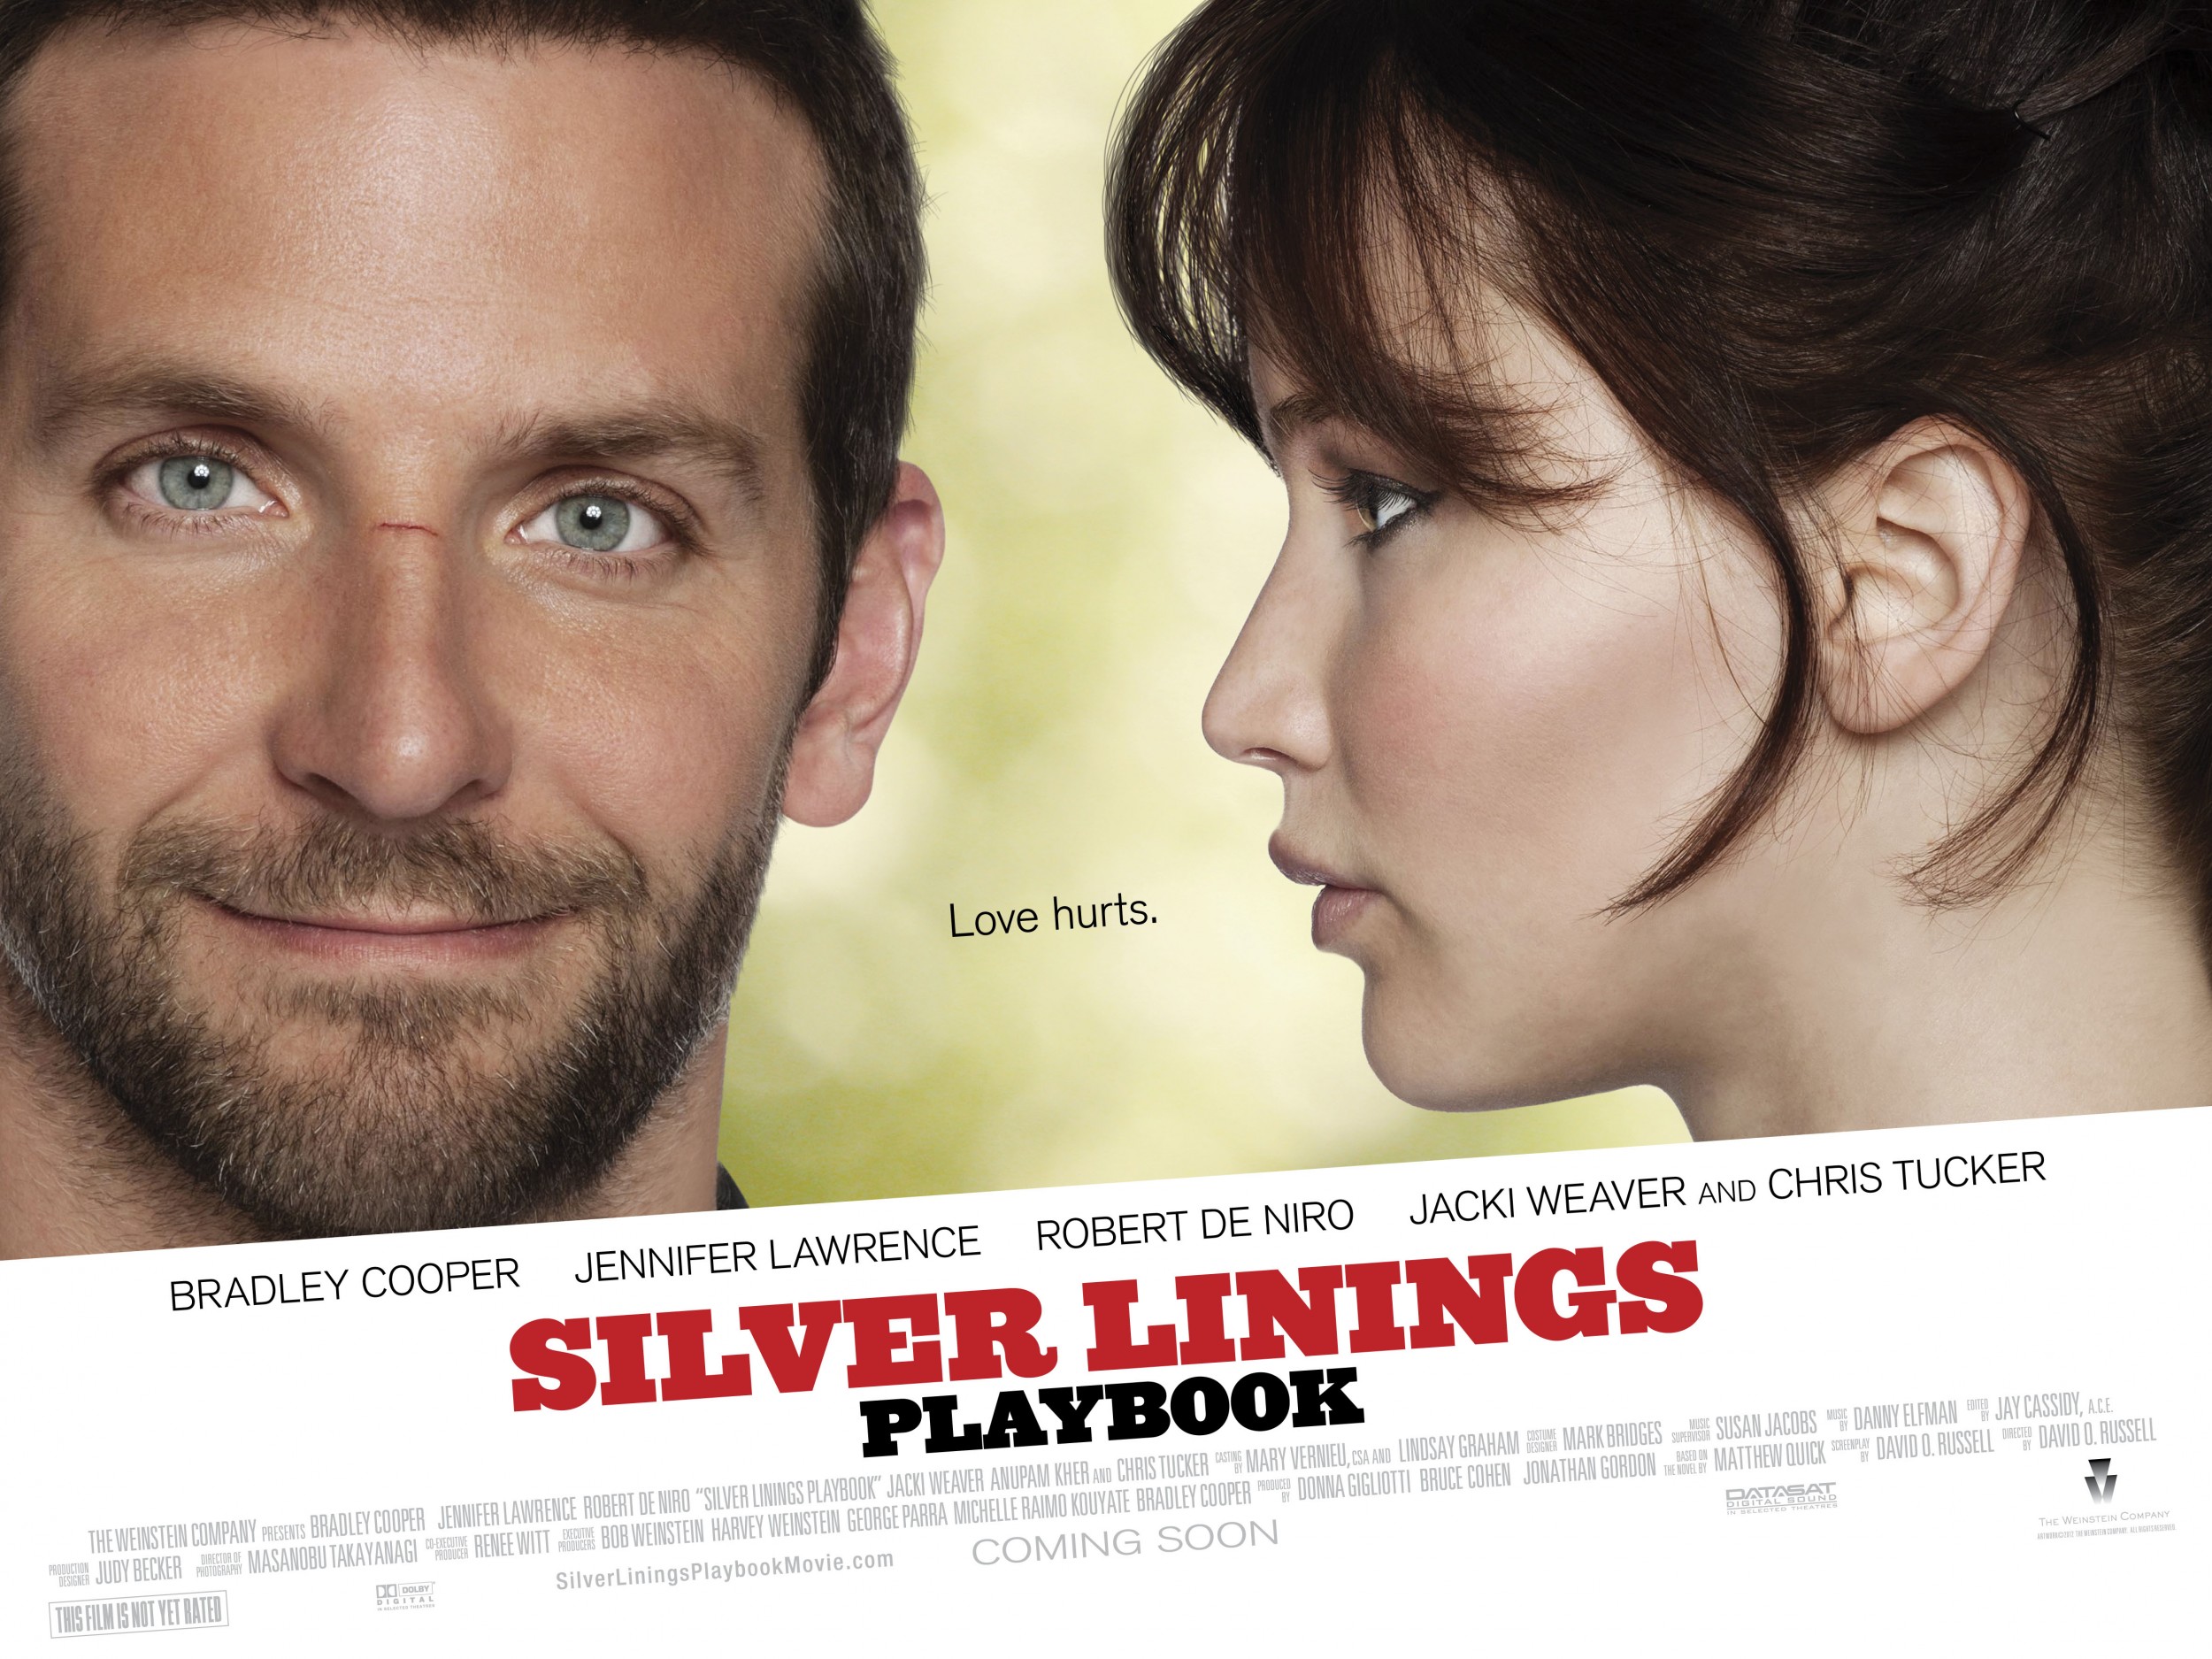 Silver-Linings-Playbook-UK-Quad-Poster